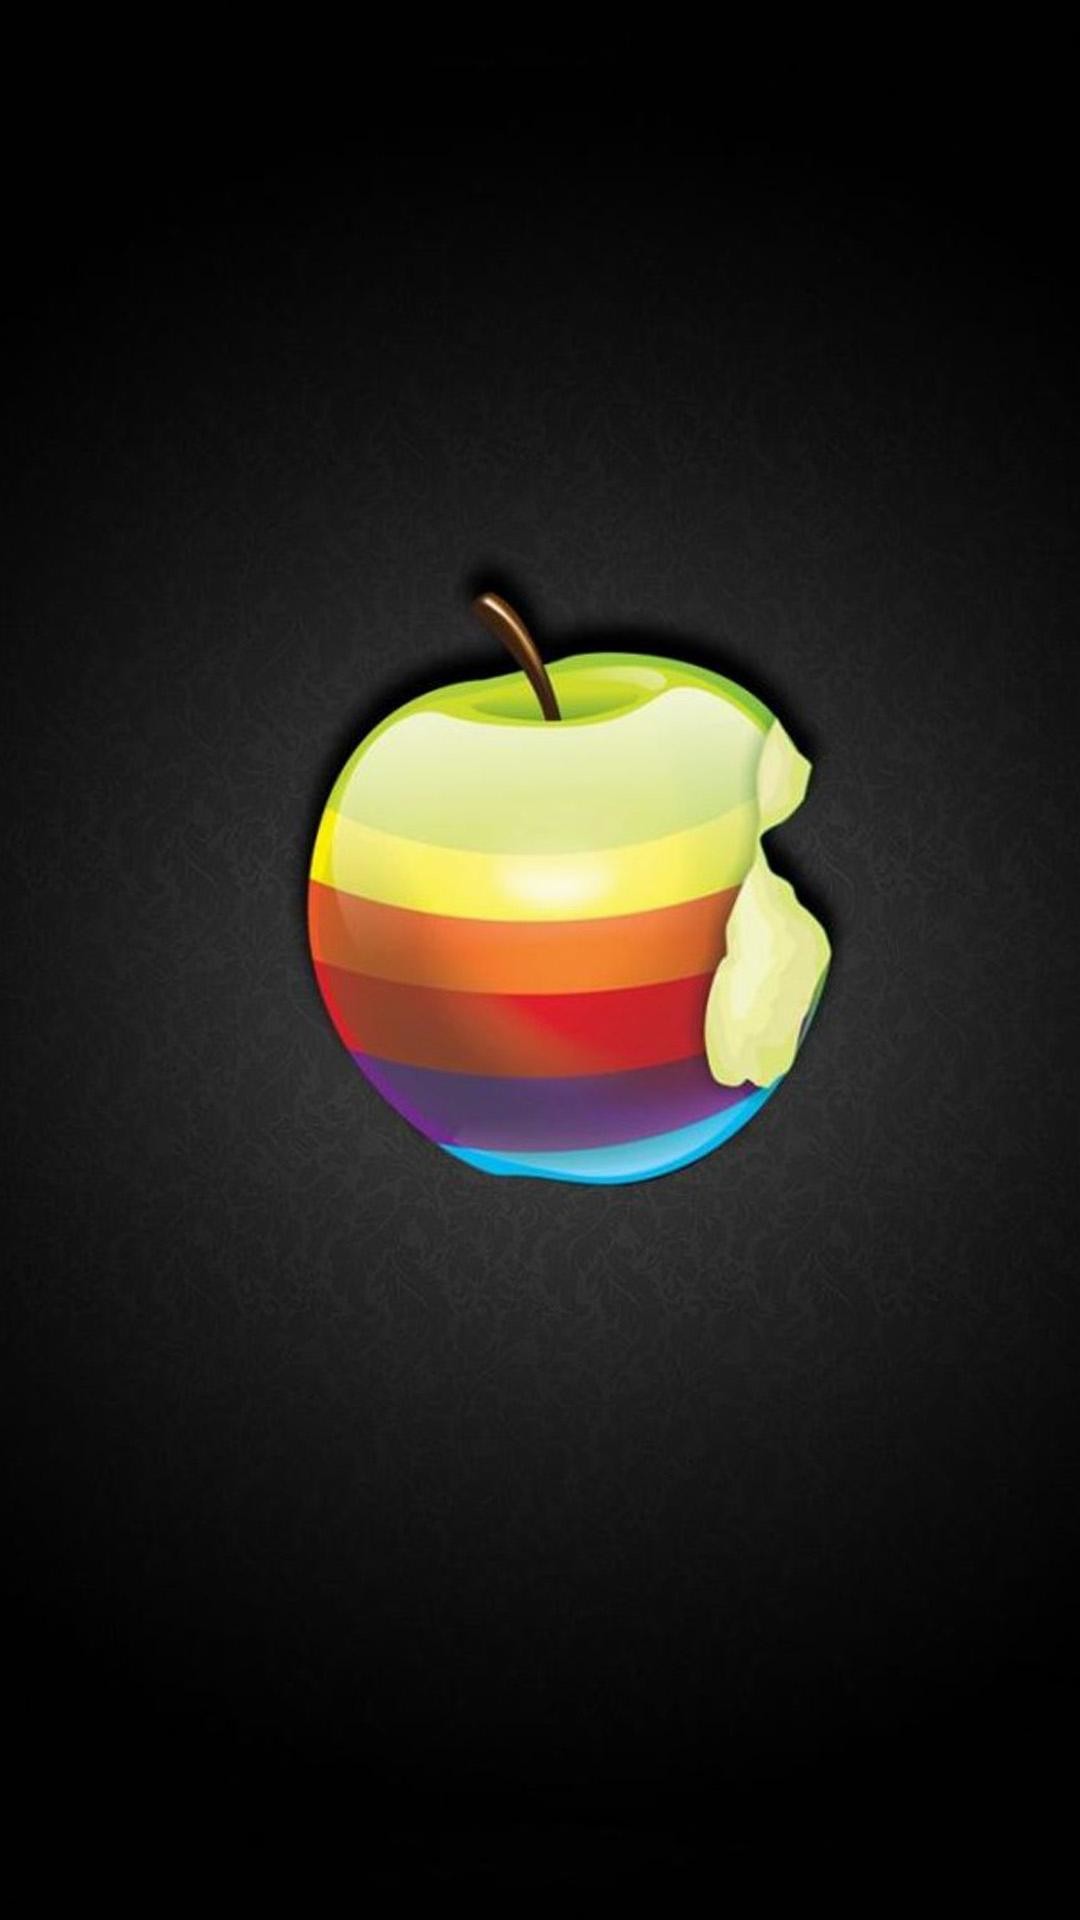 1080x1920 wallpaper.wiki-Picture-of-Apple-Logo-Wallpaper-for-